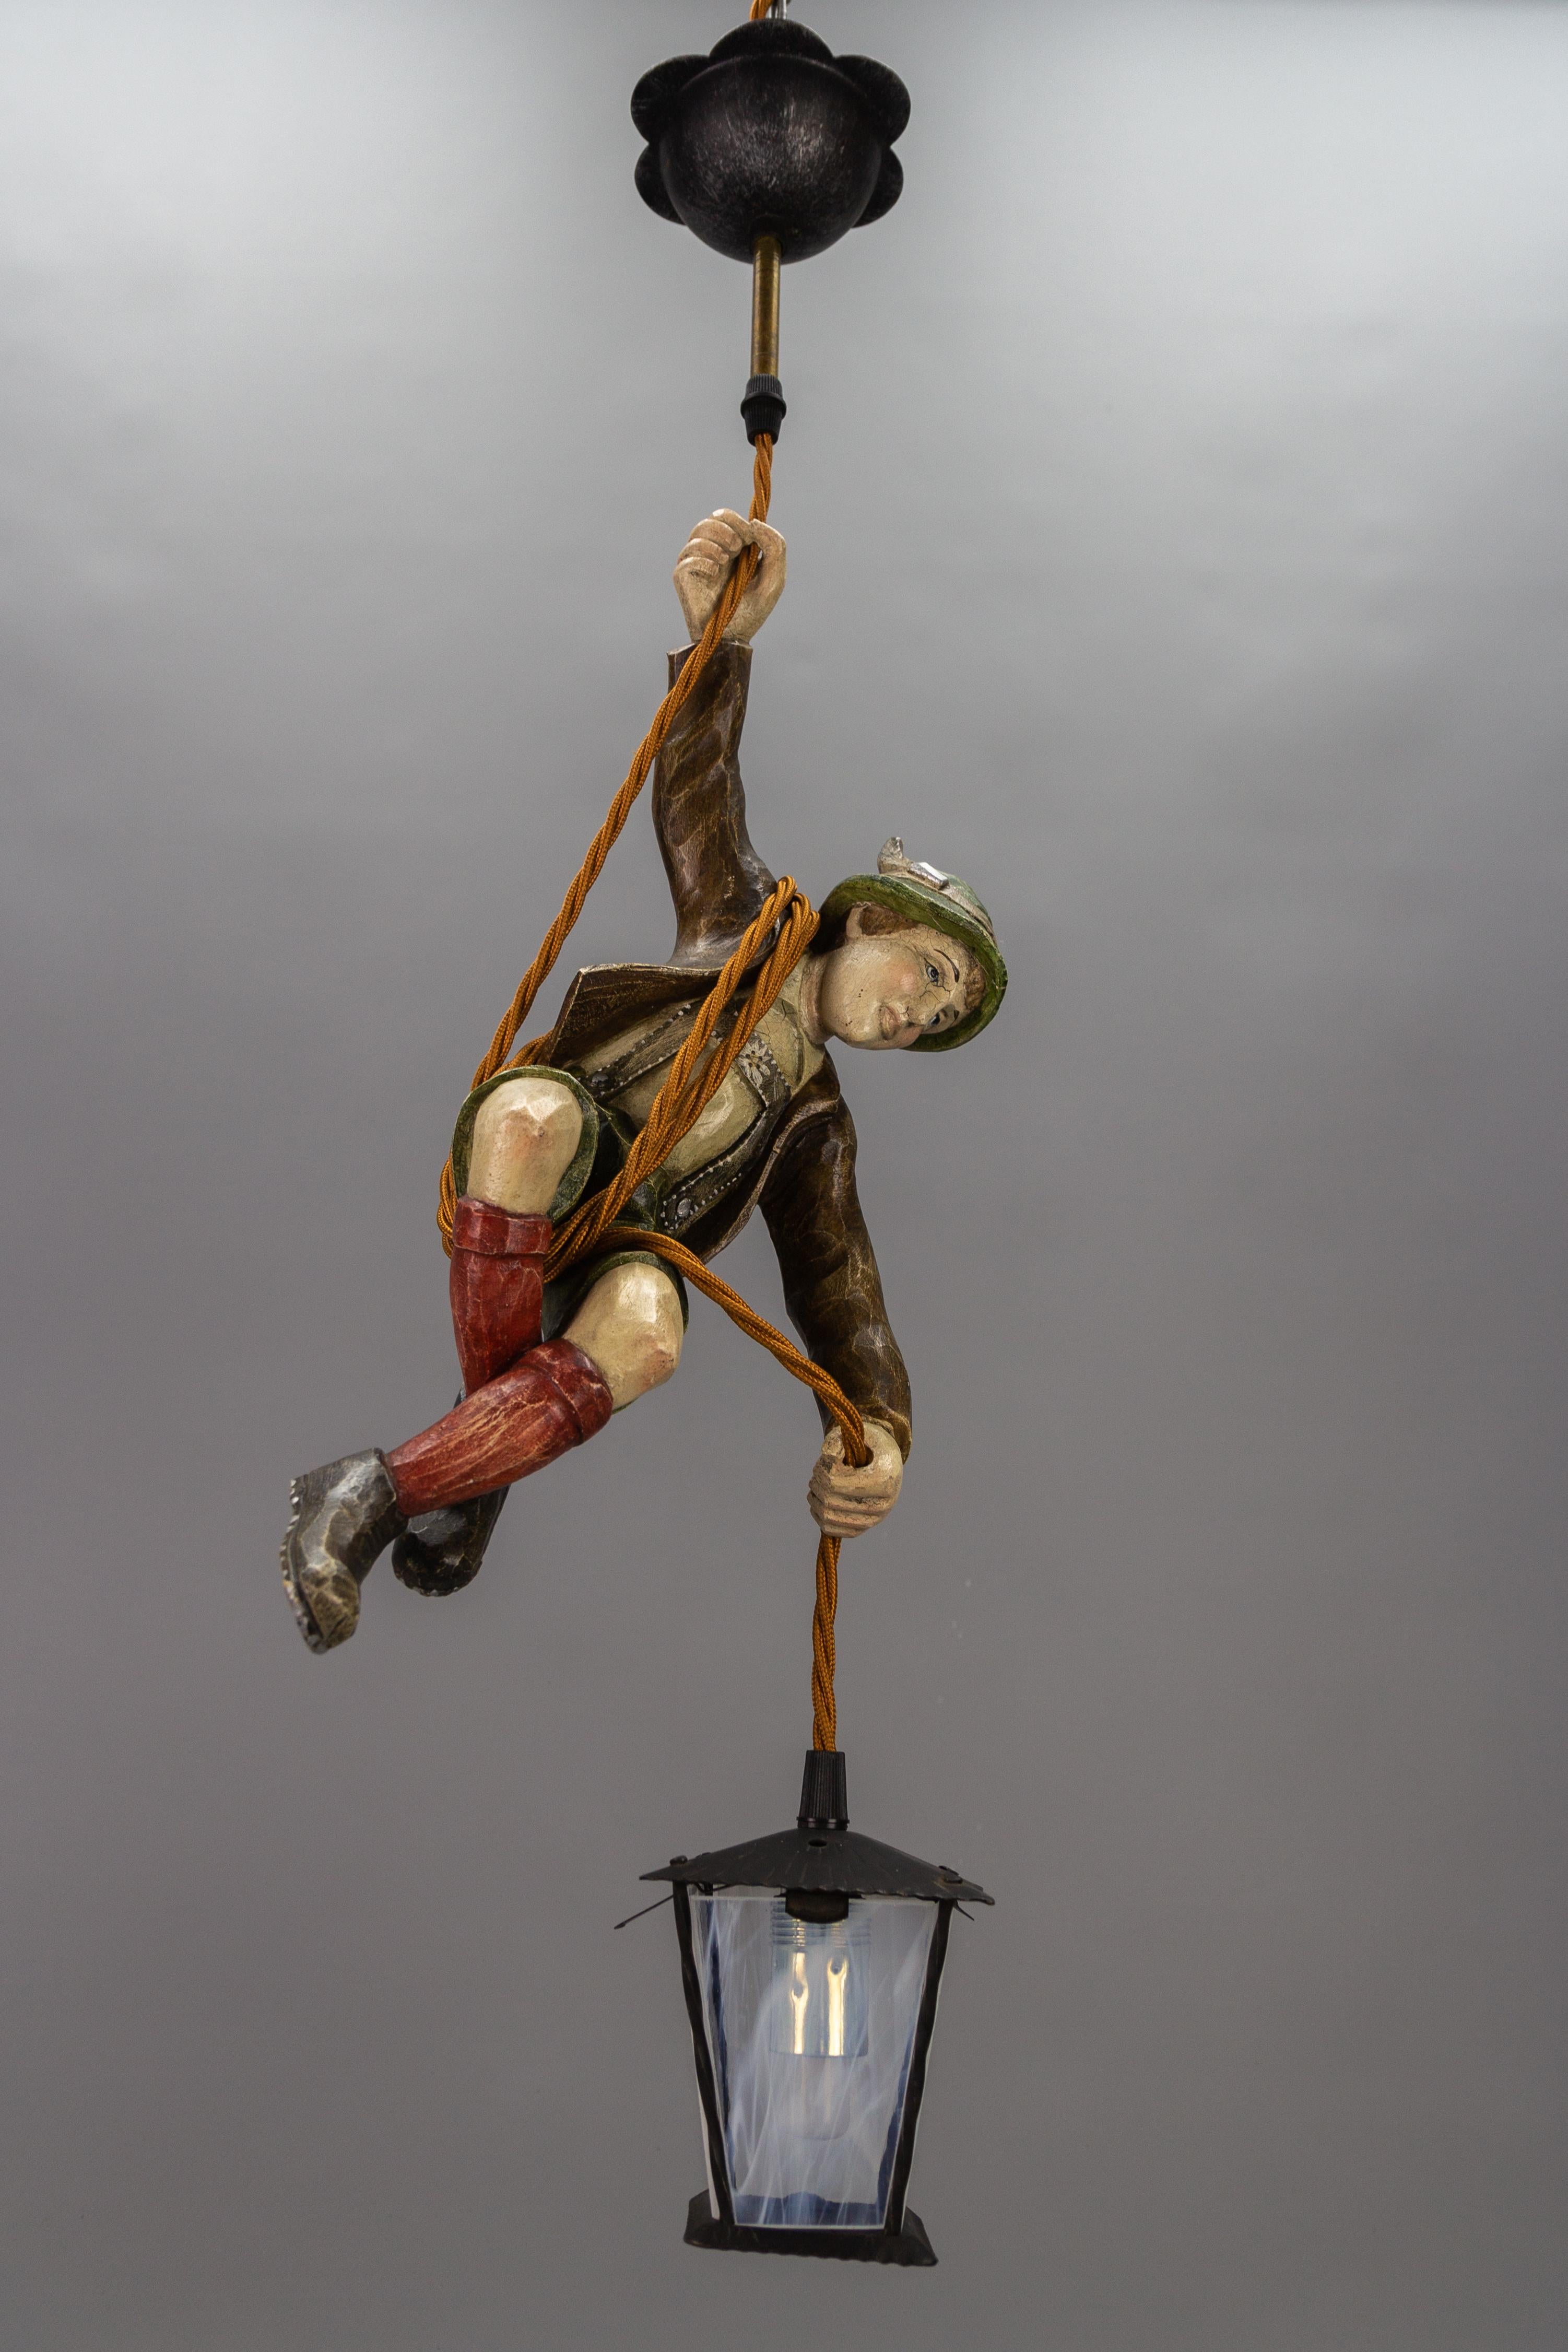 This wonderful German pendant lamp or Lüstermännchen features a hand-carved figure of a mountain climber in beautifully hand-painted Bavarian traditional clothing in brown, green, white, and red colors. The detailed carved wooden mountaineer wears a